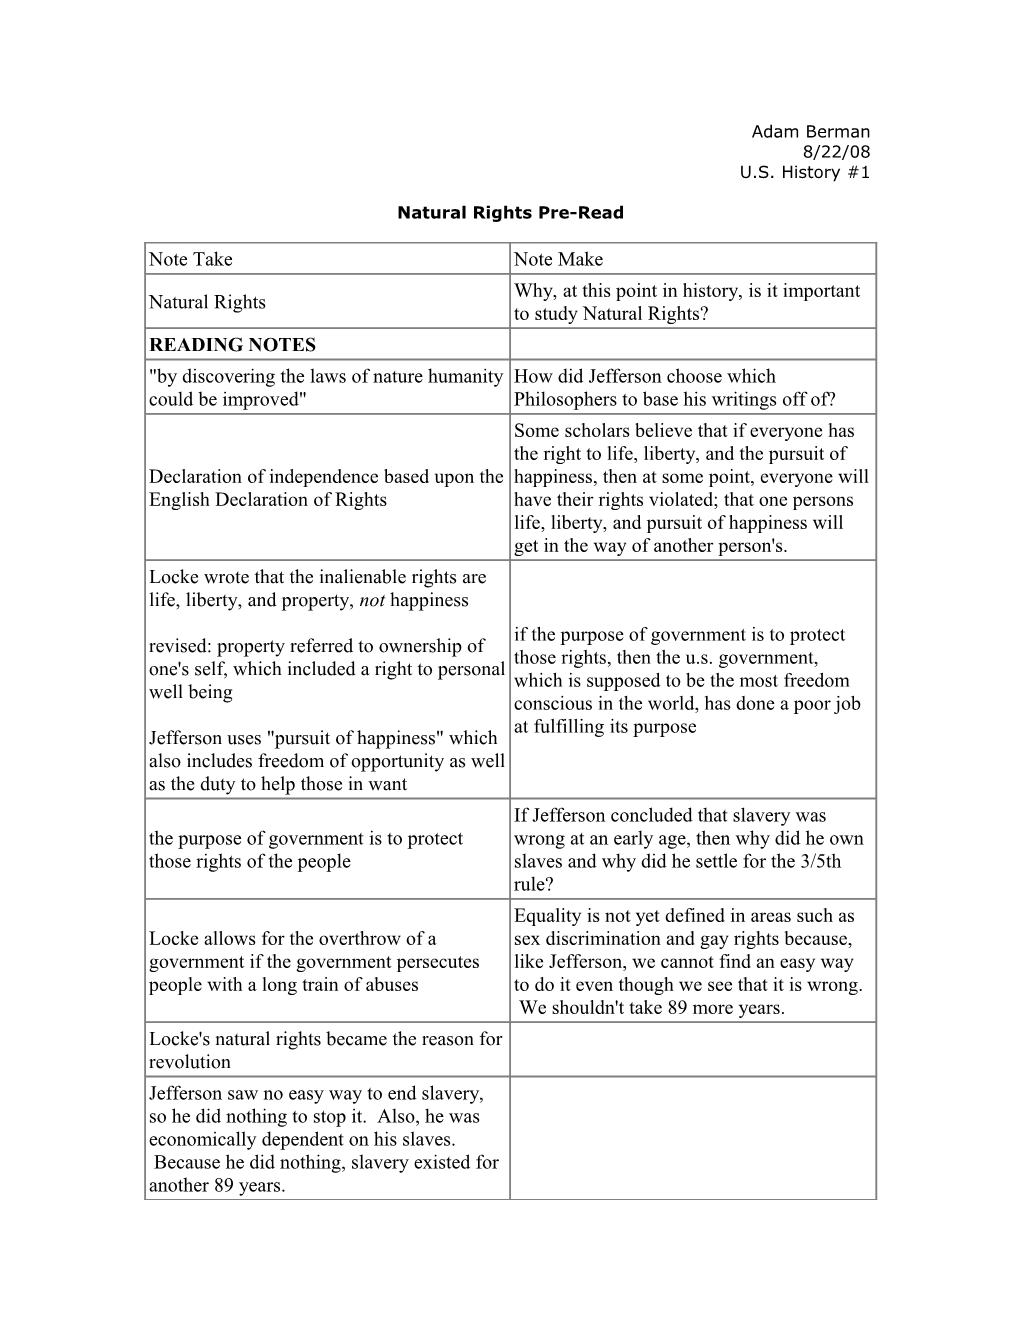 Natural Rights Pre-Read